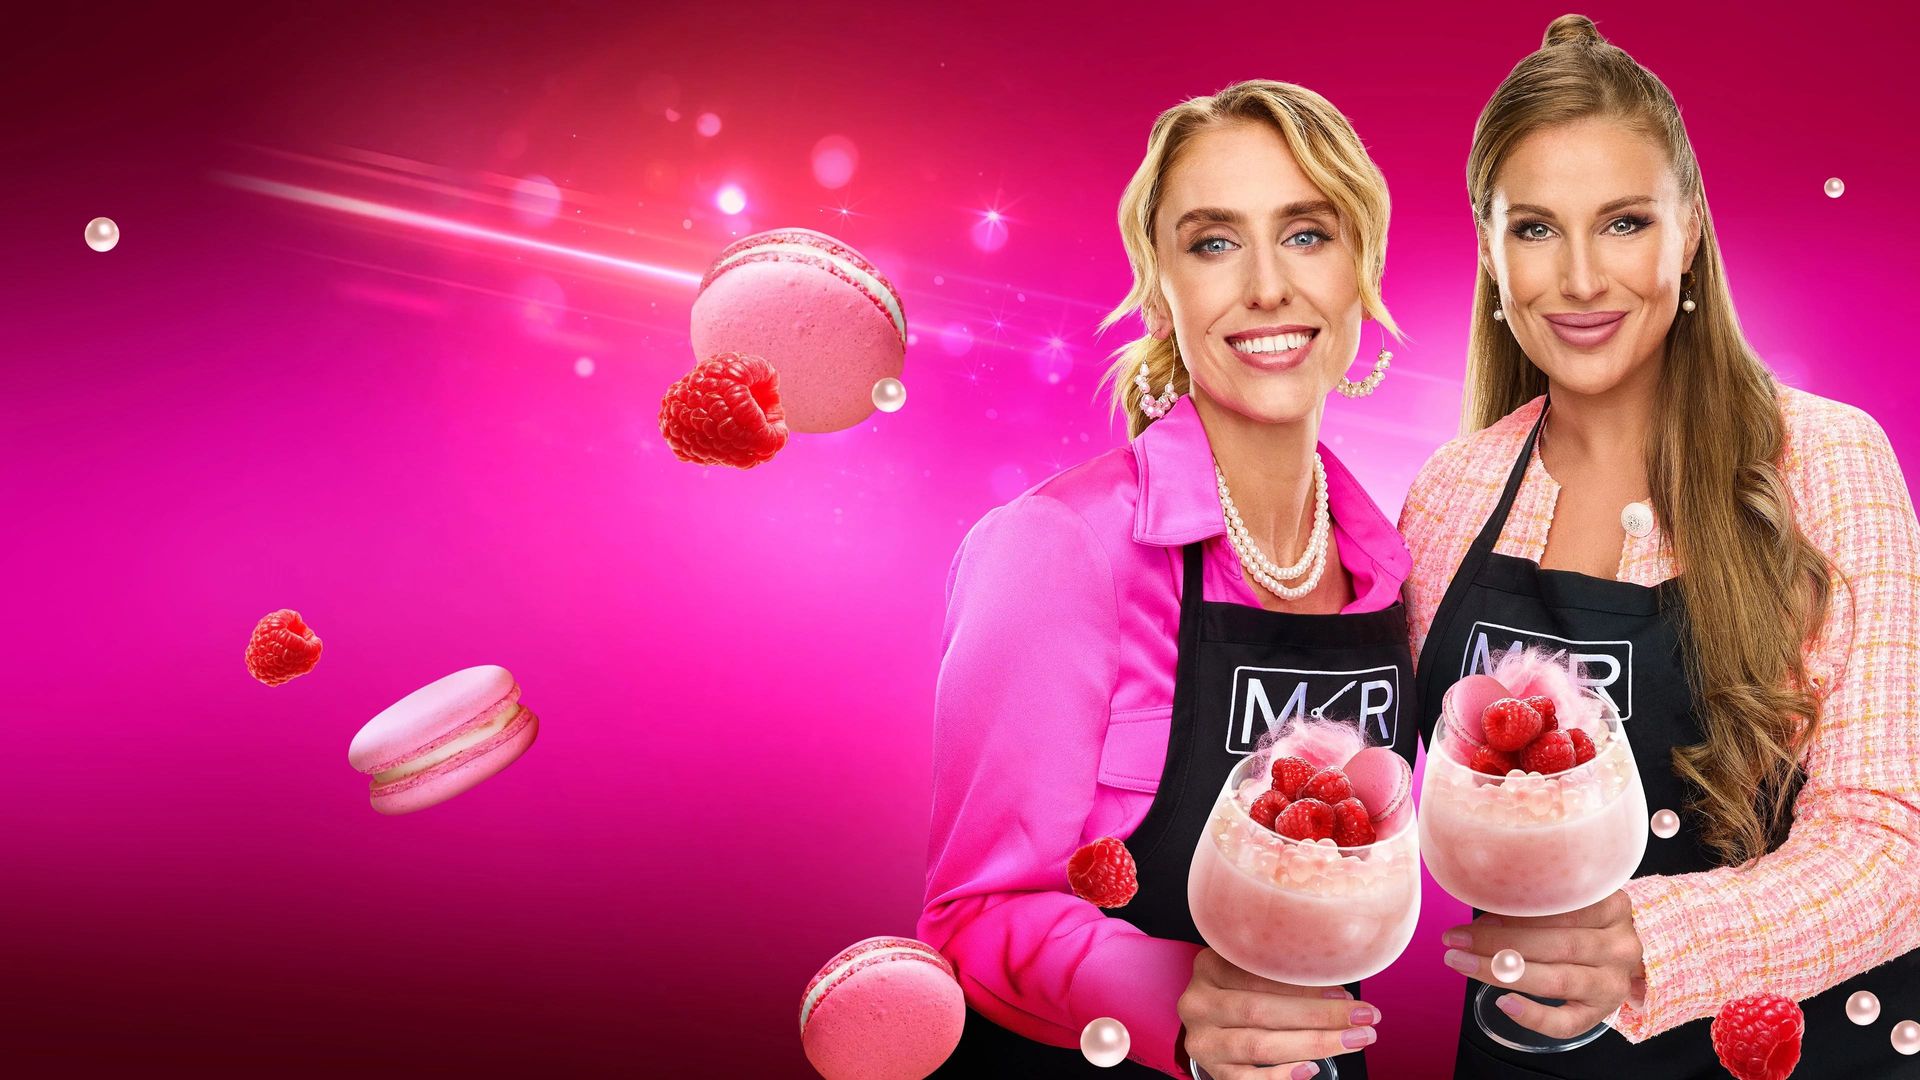 My Kitchen Rules background